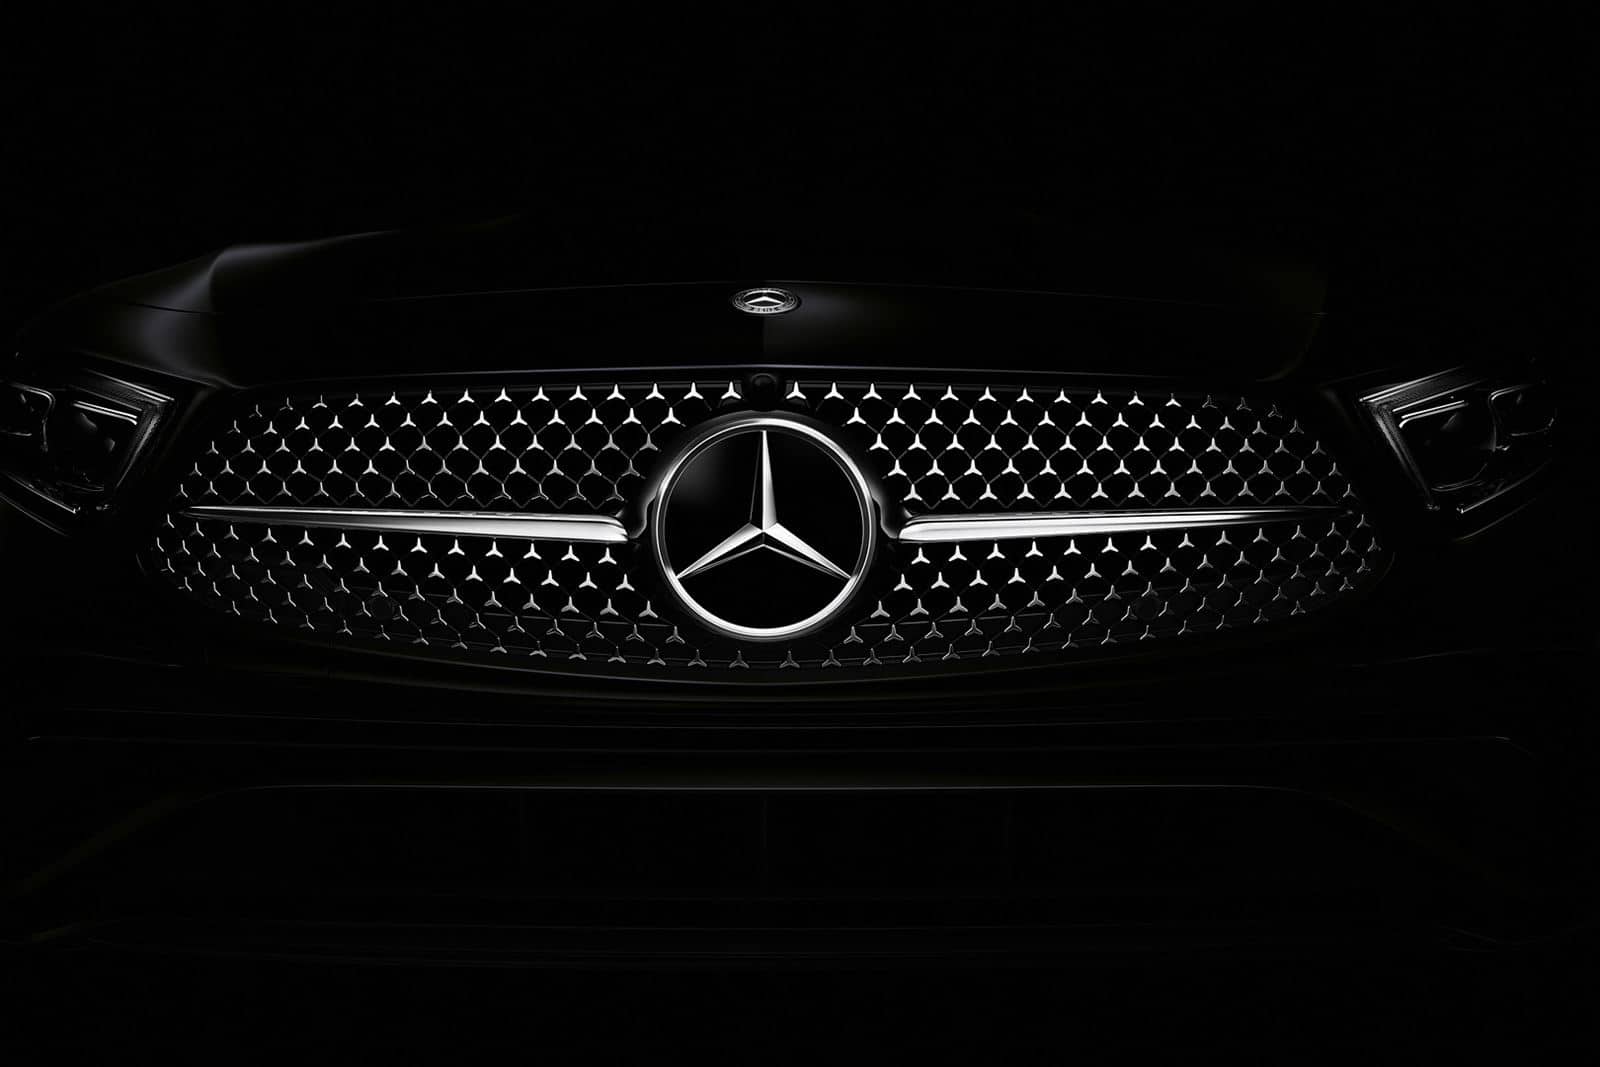 What does the Mercedes logo mean